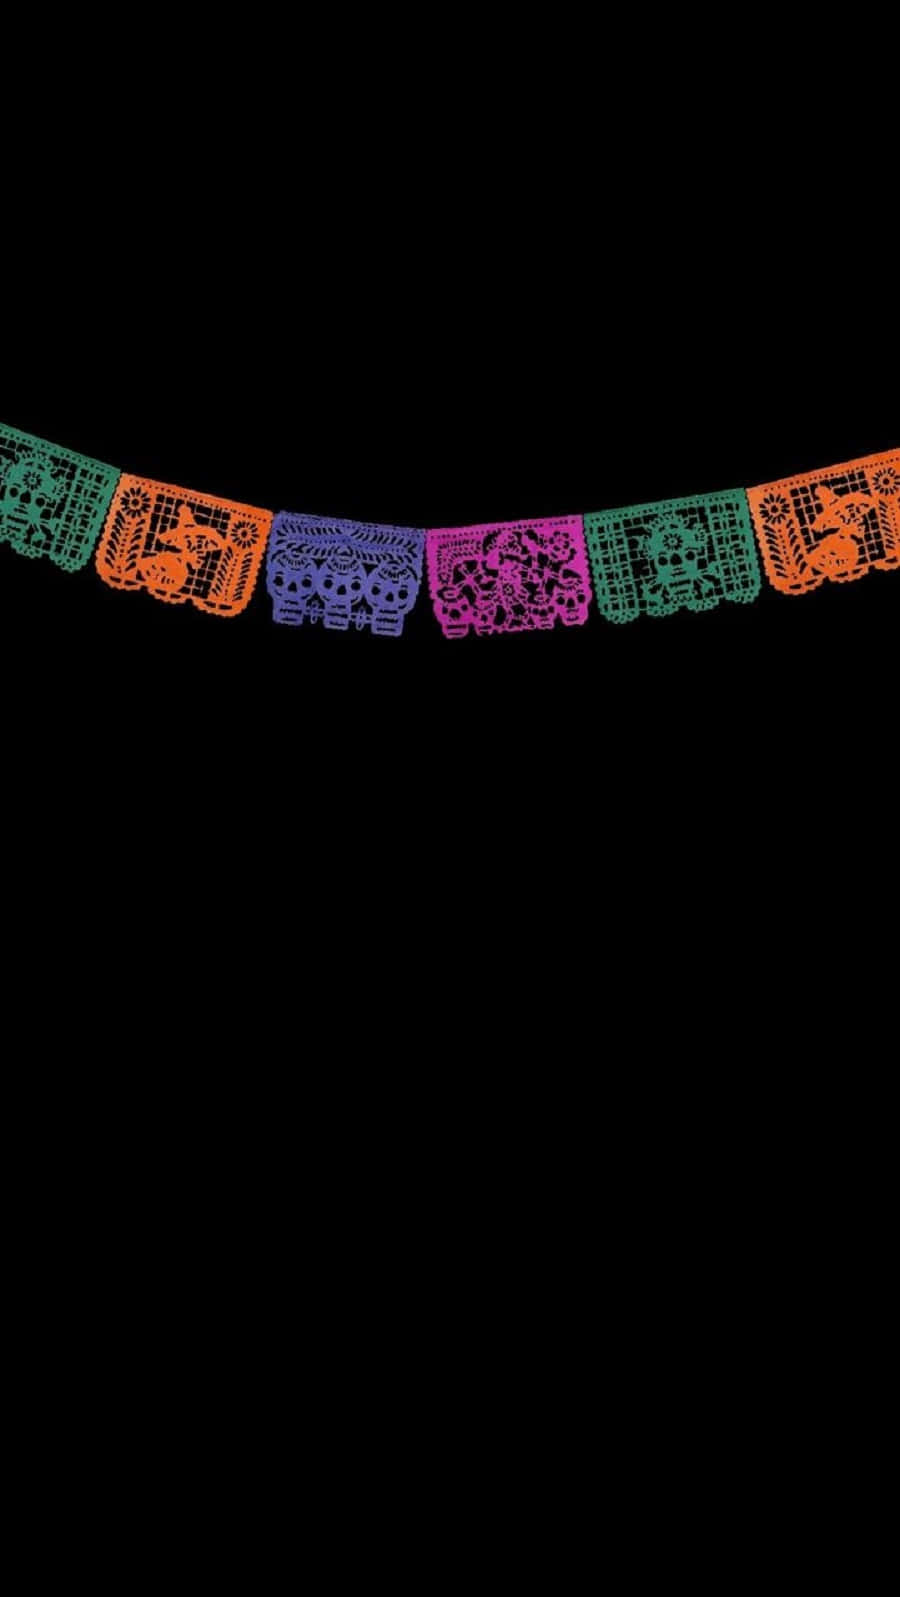 A Colorful Mexican Paper Garland Hanging On A Black Background